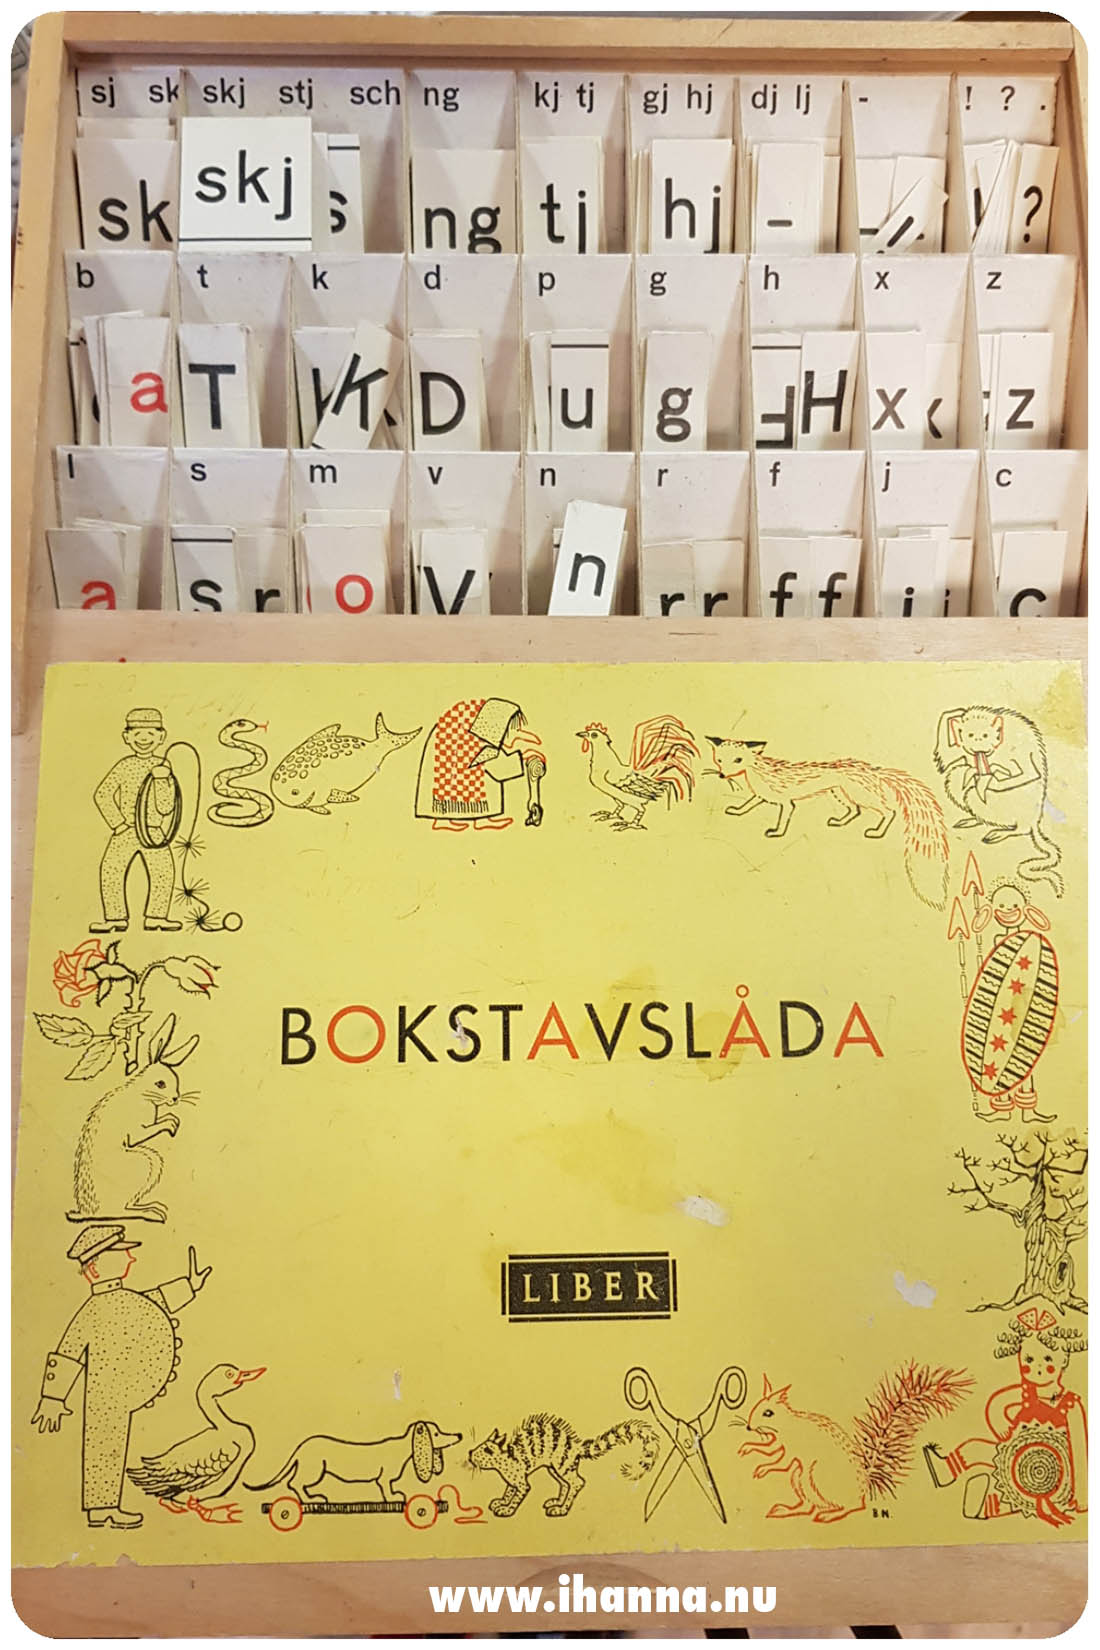 Seen at the Thrift Shop in Sweden : Bokstavslåda / box of Swedish alphabet letters for School - Photo Copyright Hanna Andersson #loppis